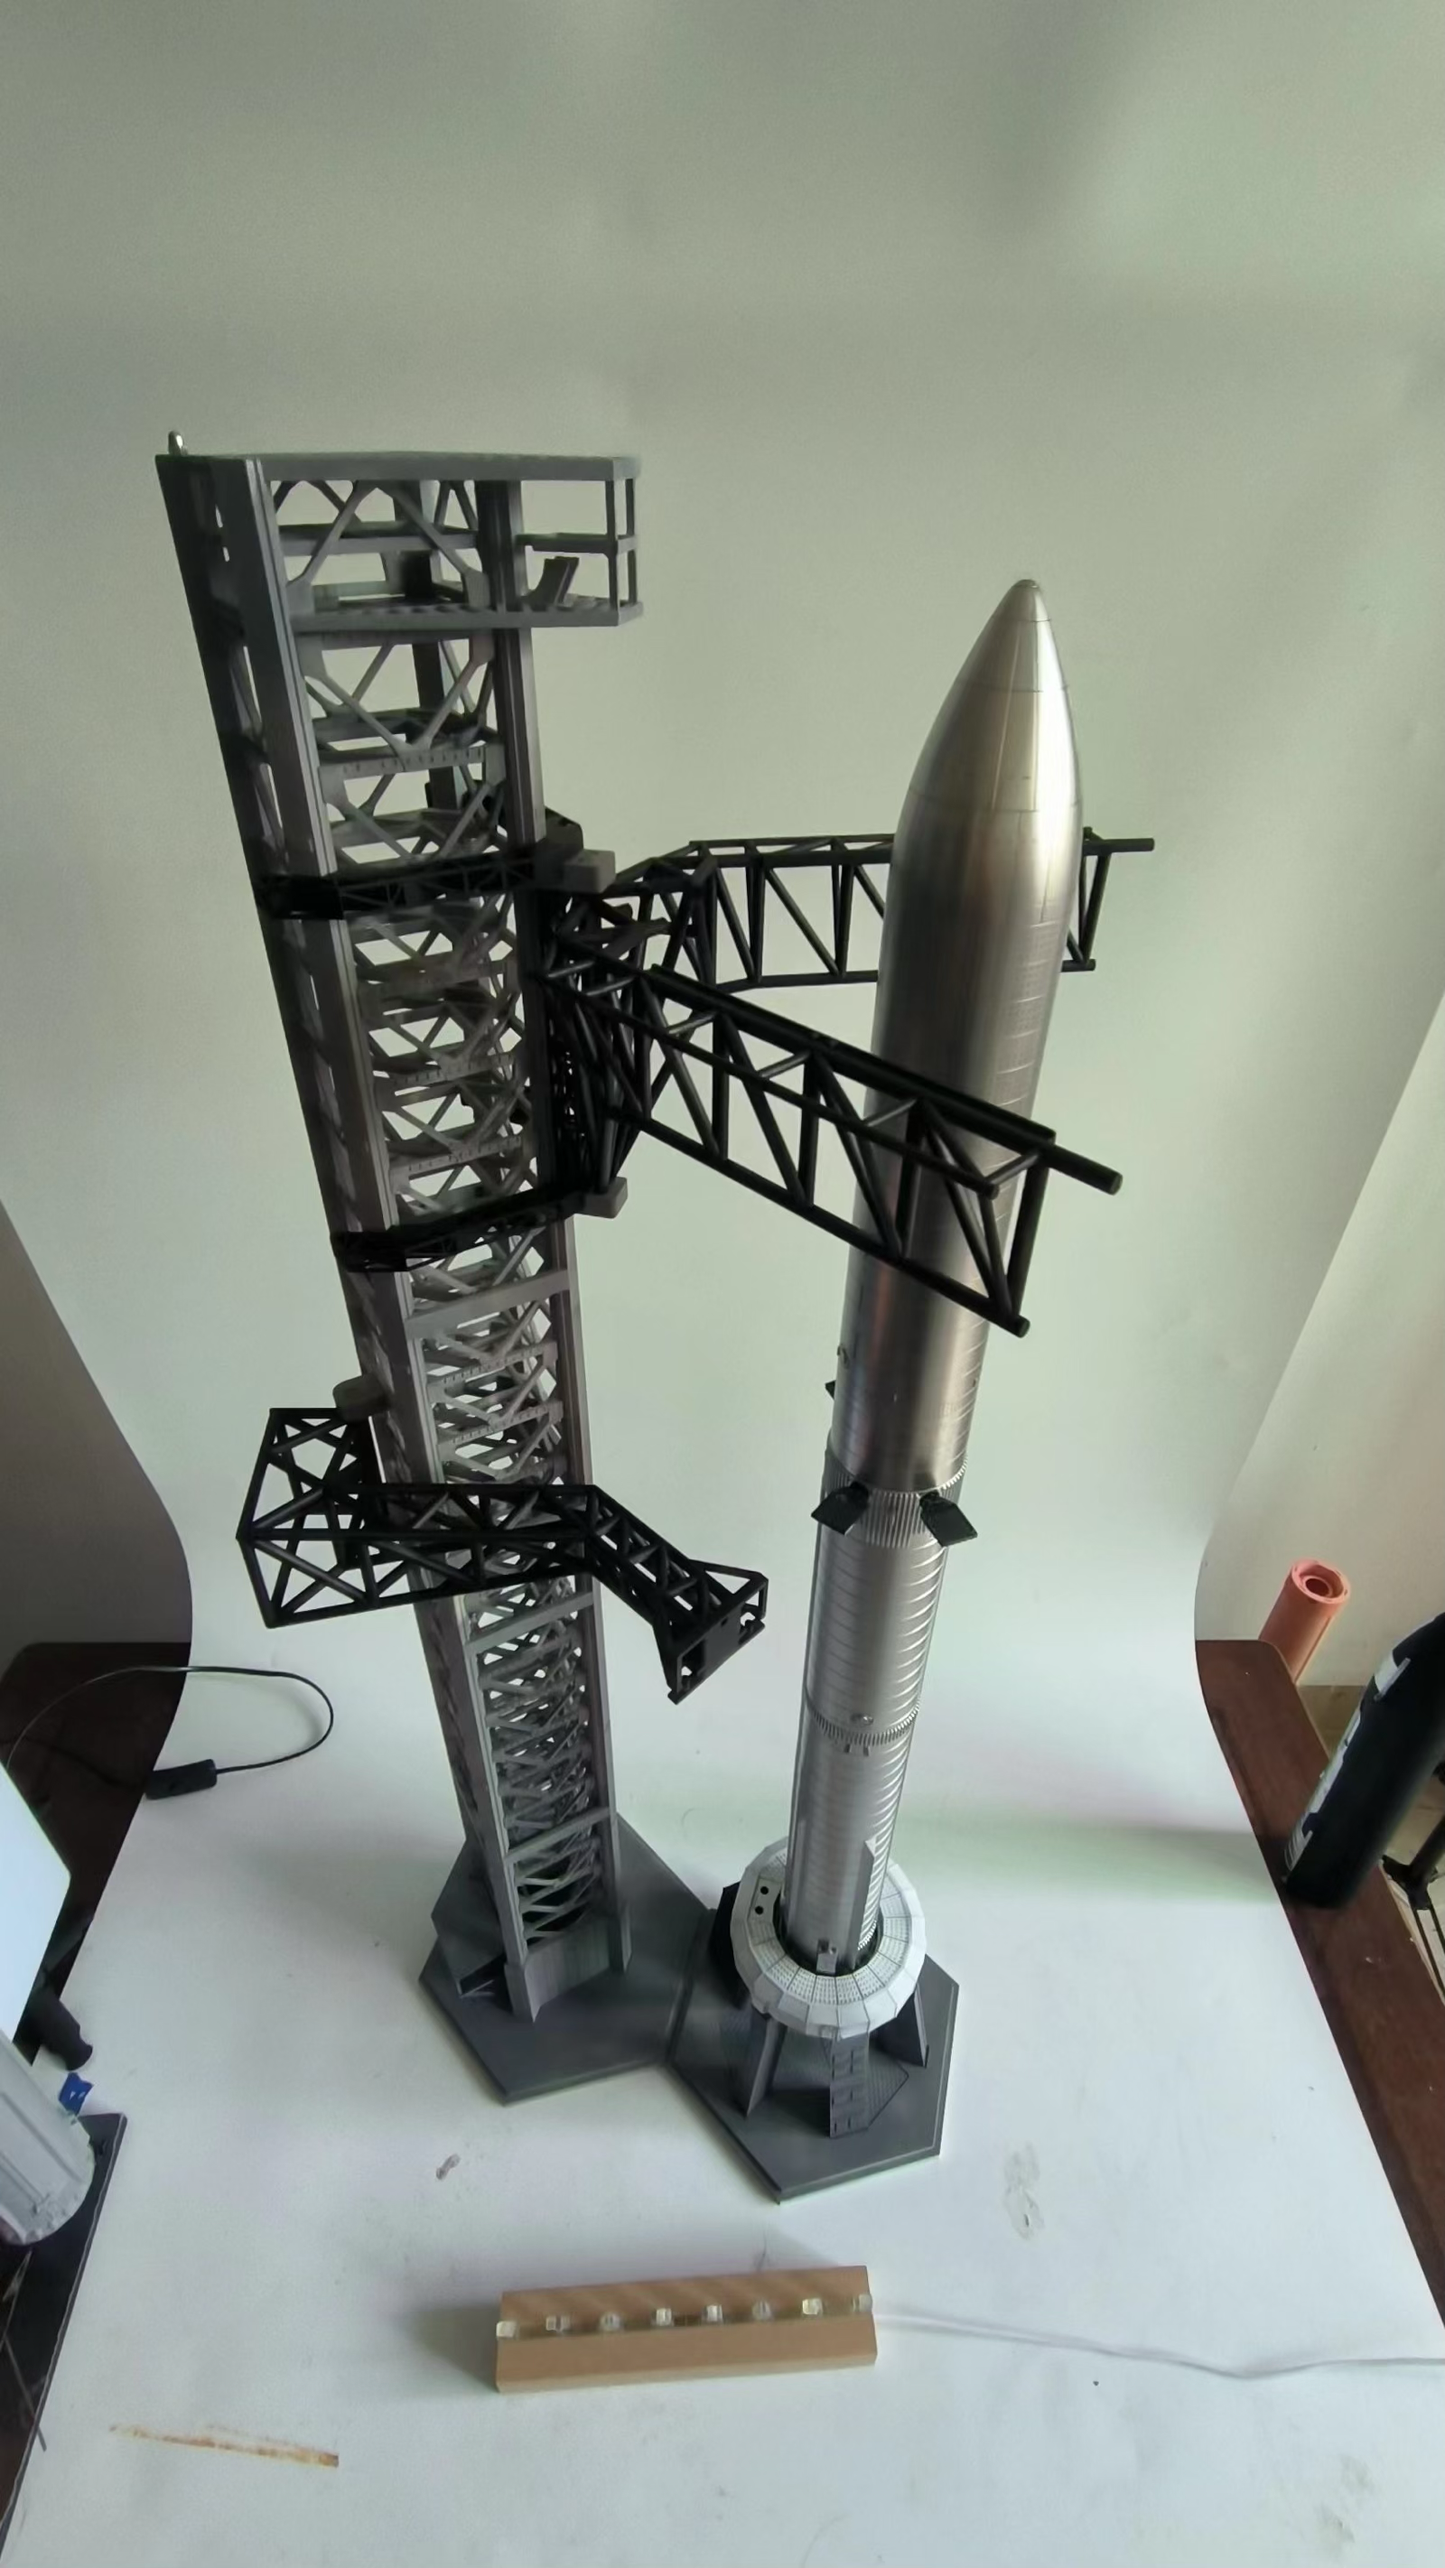 SpaceX Starship 1/144 Superheavy Booster7 model - resin printed super rocket model